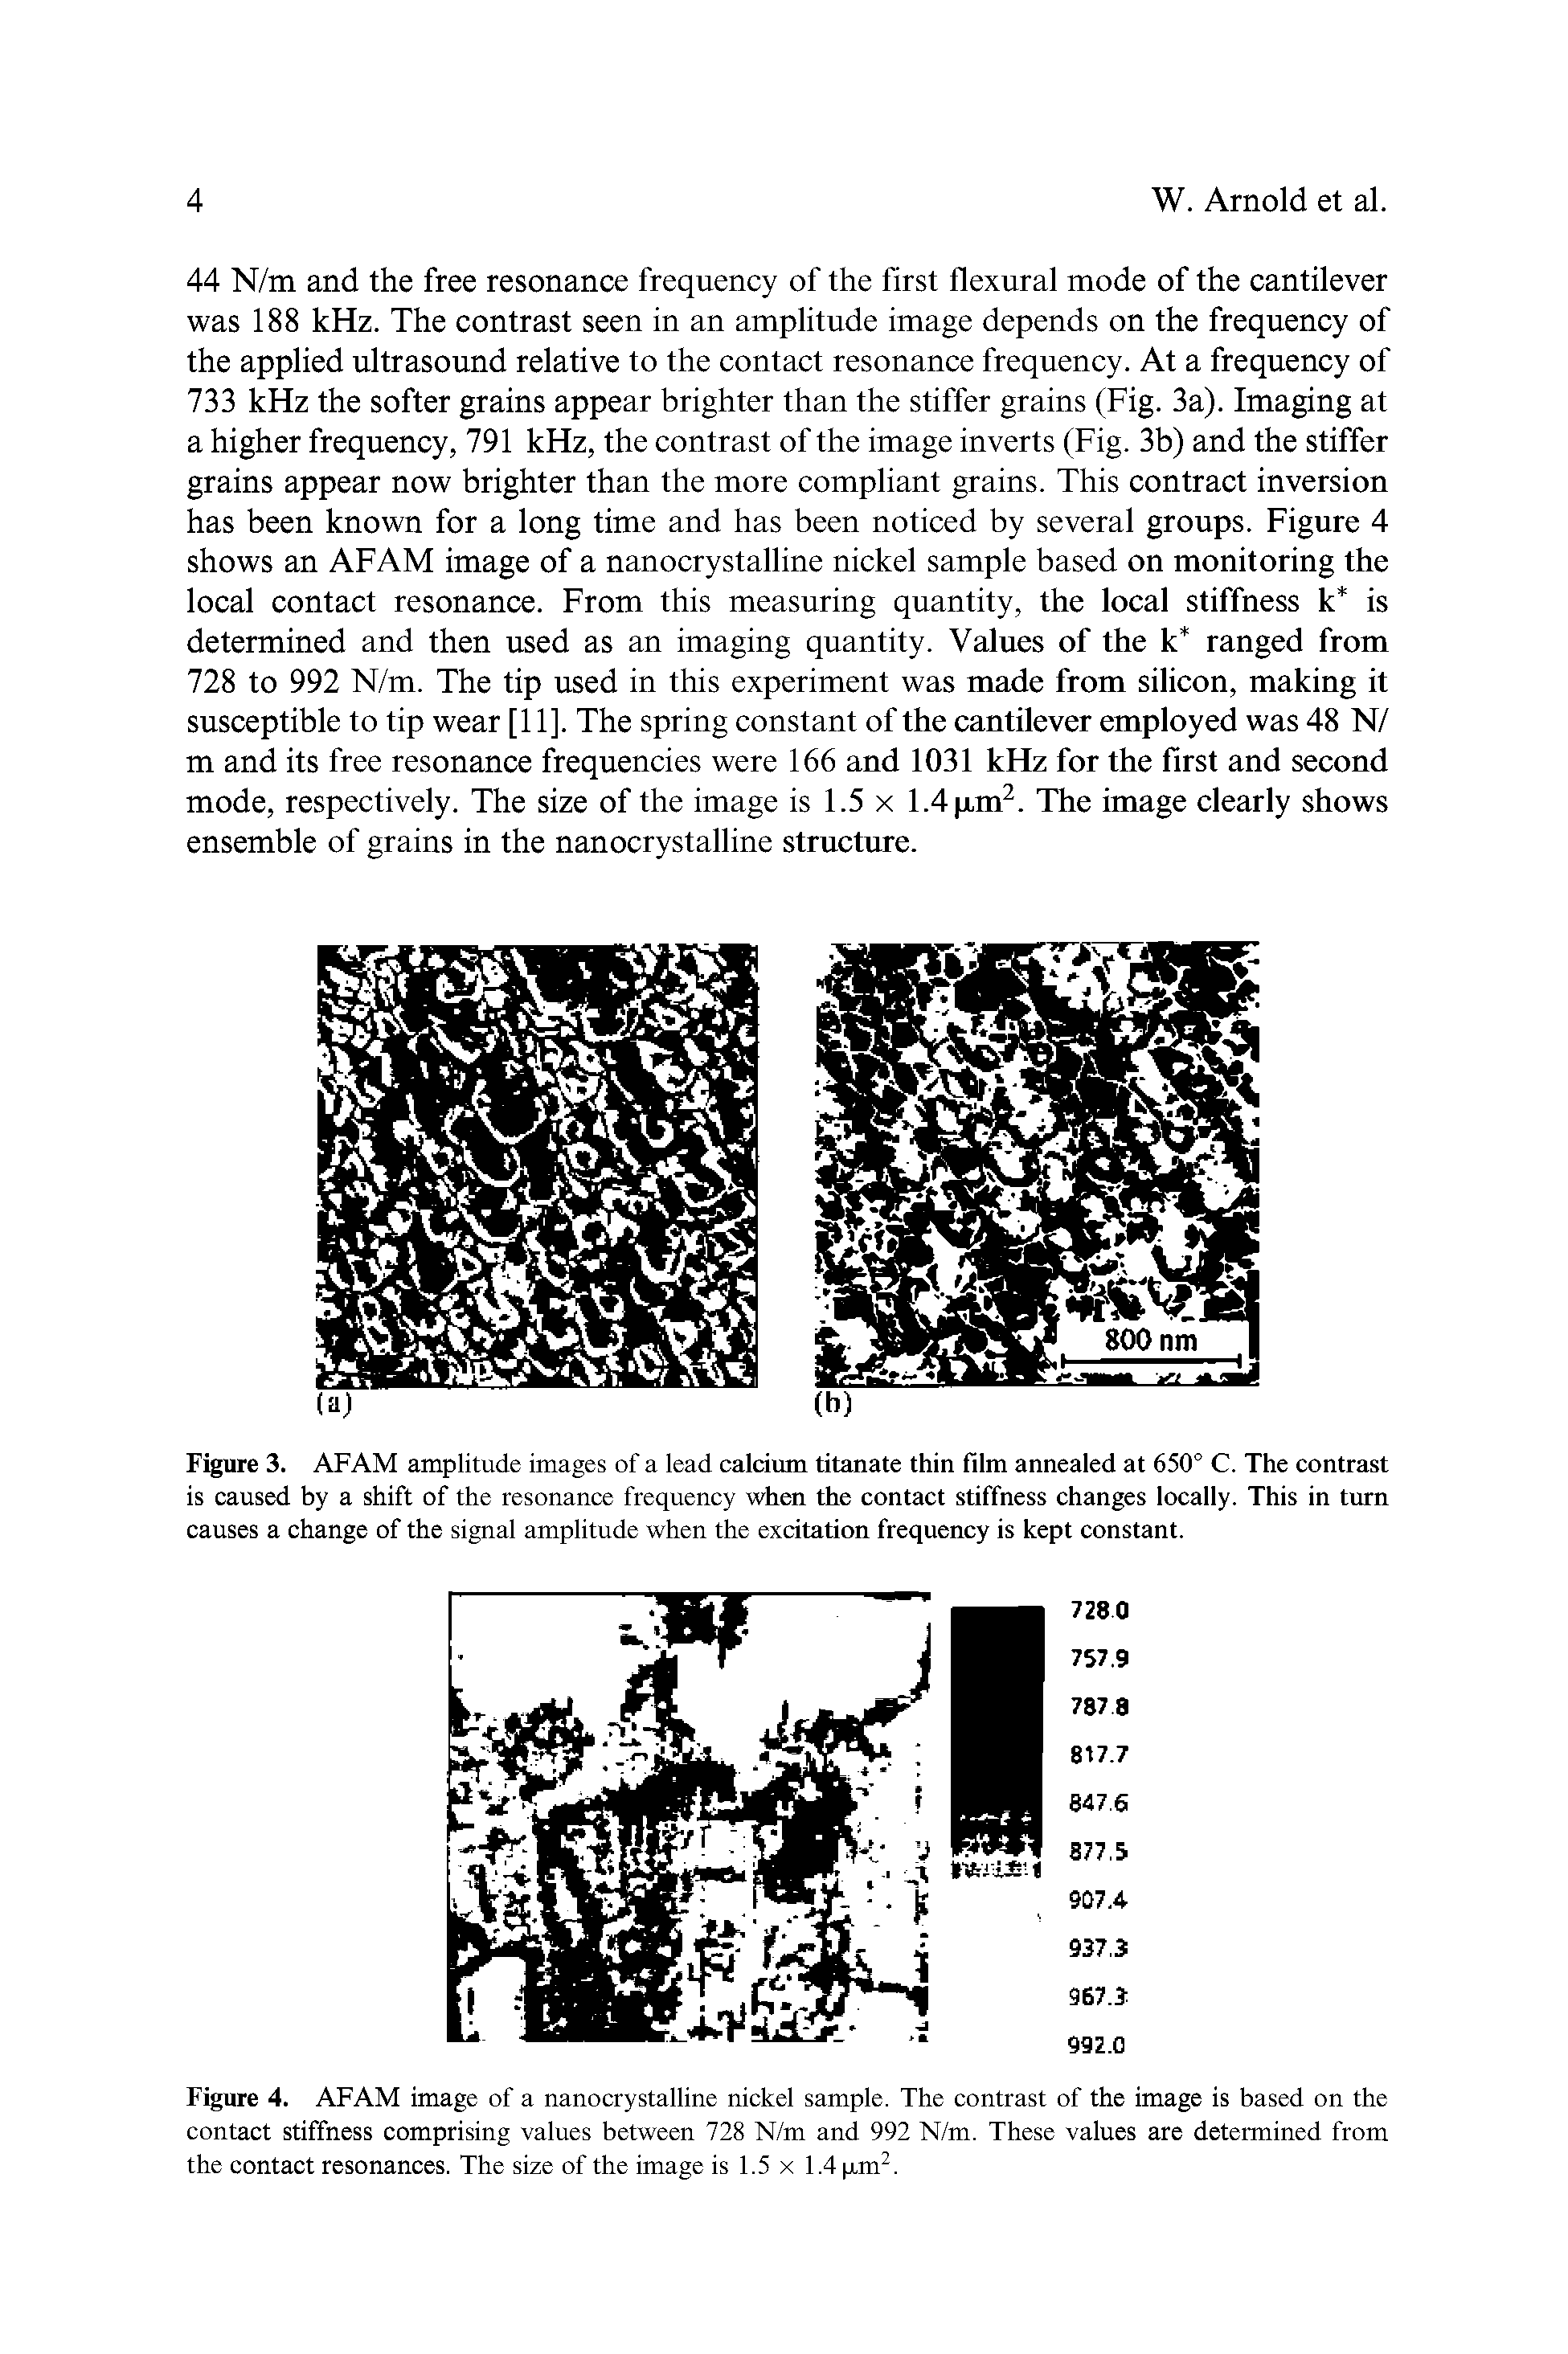 Figure 3. AFAM amplitude images of a lead caldum titanate thin film annealed at 650° C. The contrast is caused by a shift of the resonance frequency when the contact sfifihess changes locally. This in turn causes a change of the signal amplitude when the excitation frequency is kept constant.